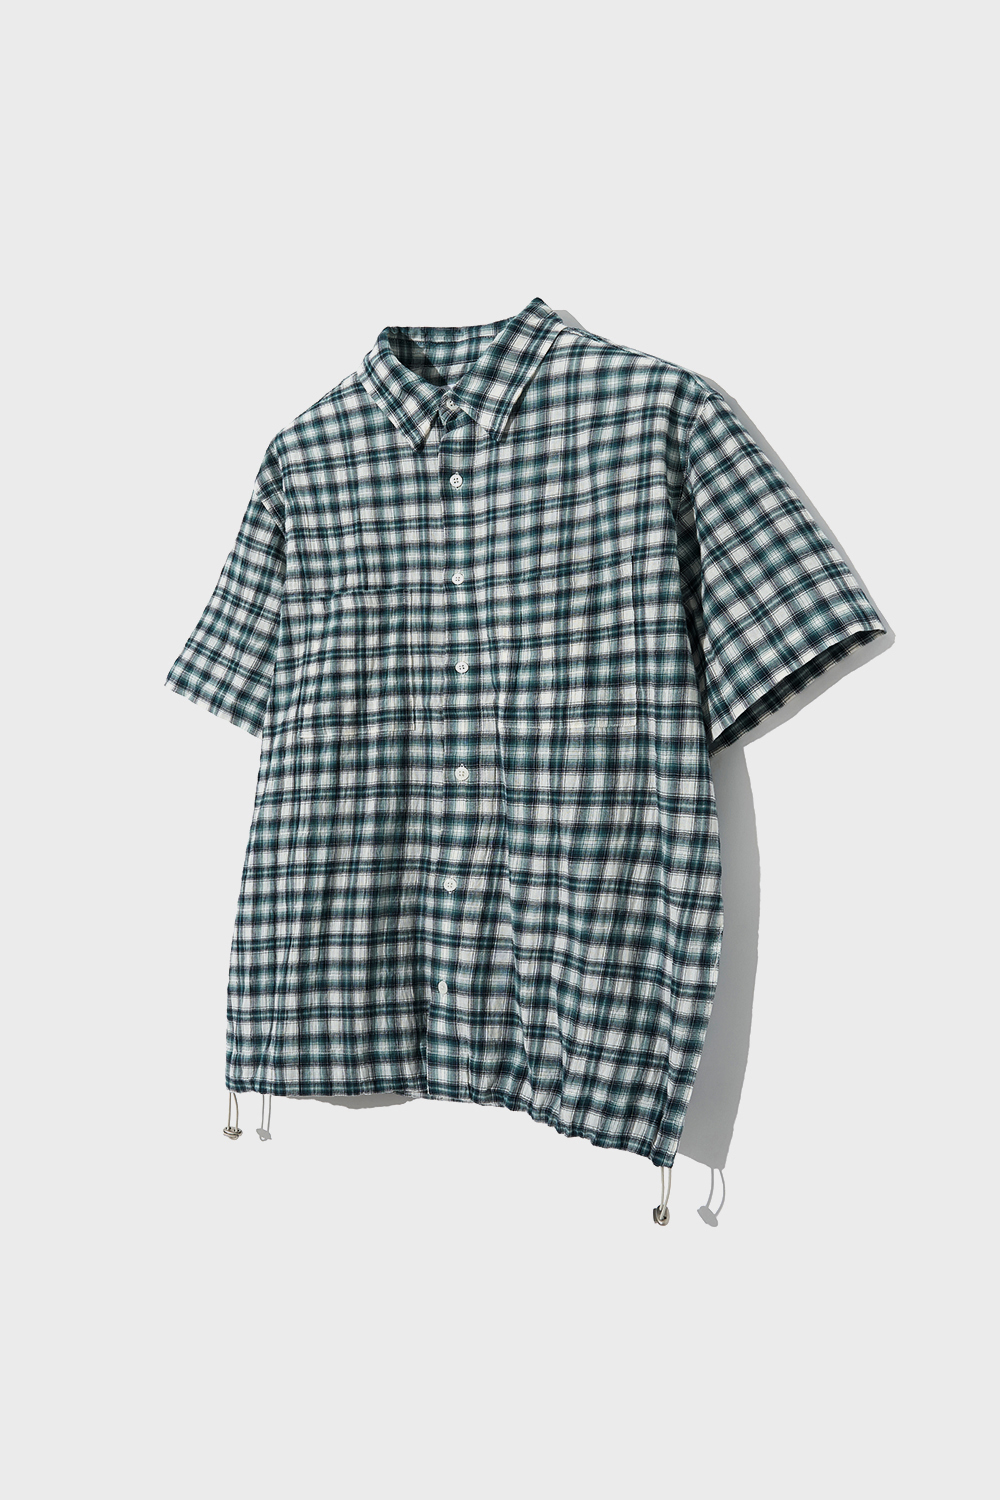 Aiden String Half Shirts (Green Check) - OURSCOPE